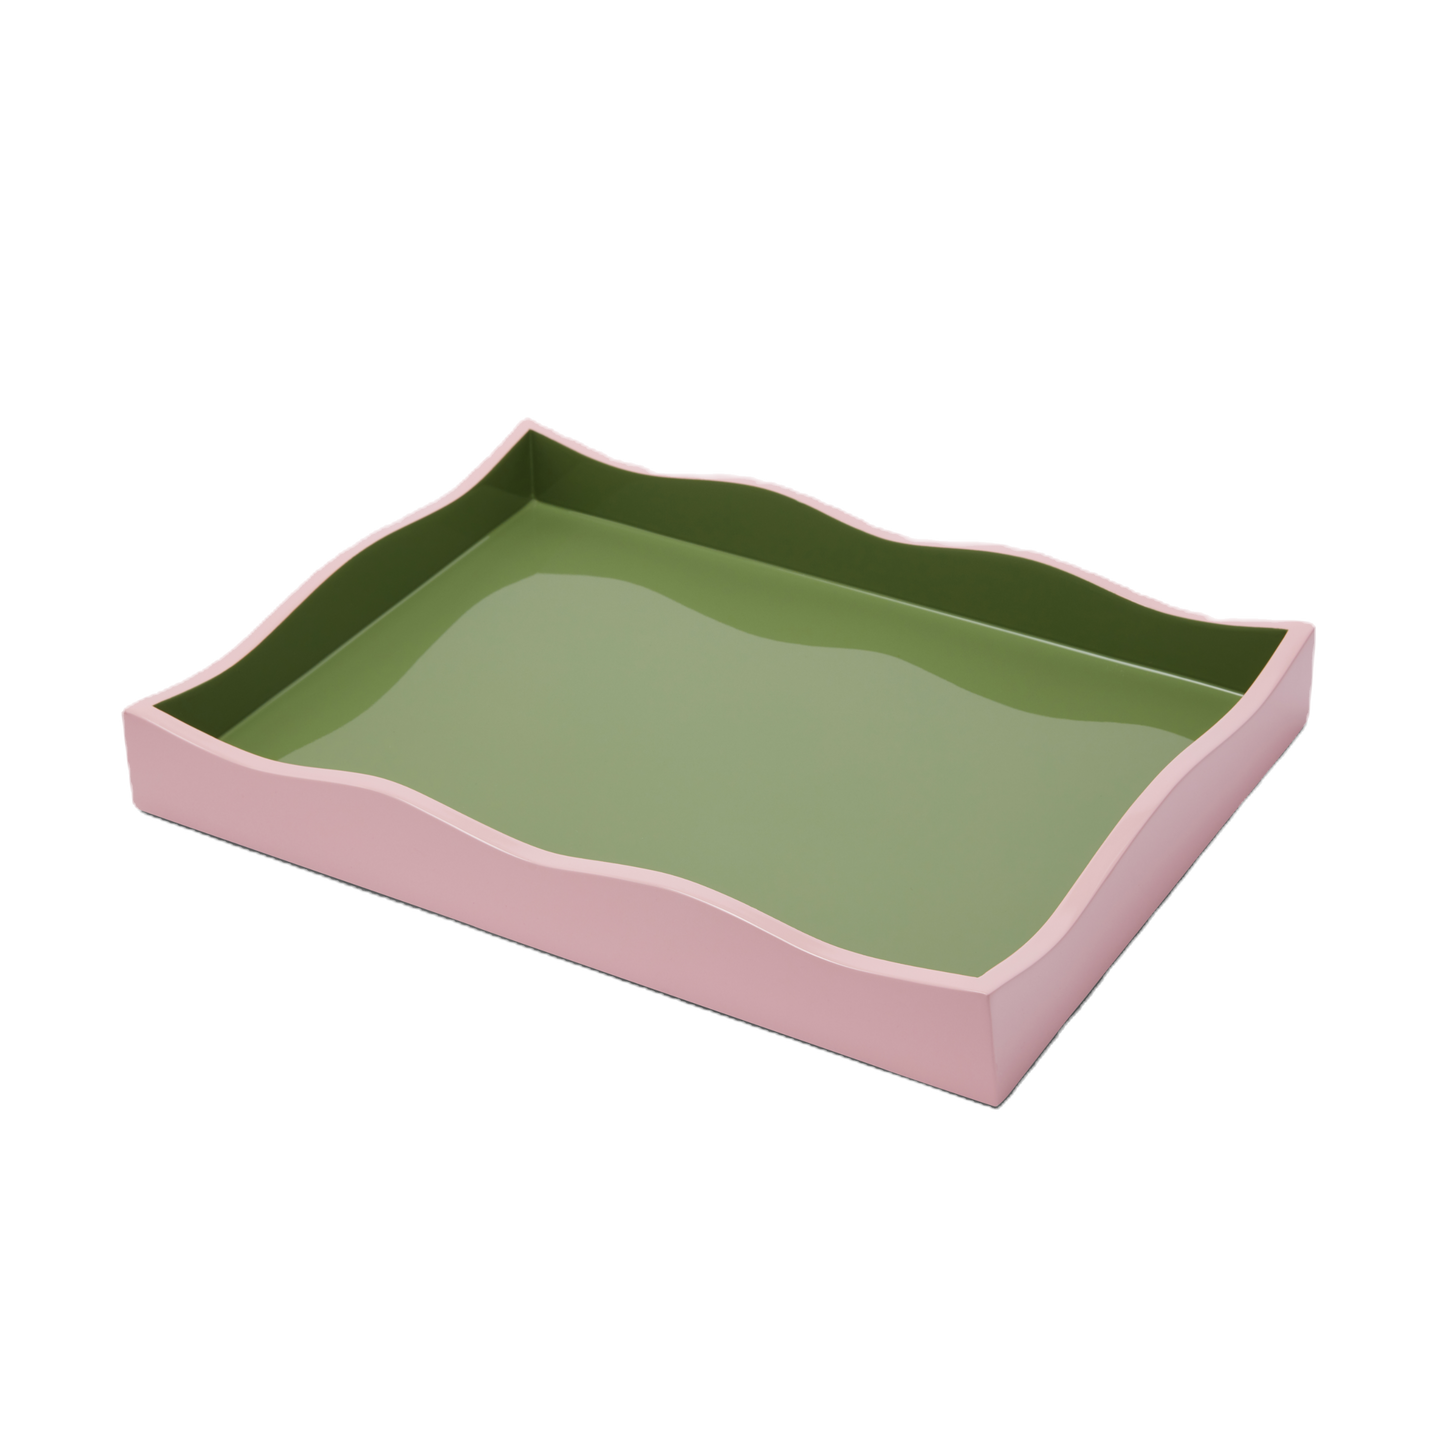 Wiggle Tray in Pink and Green